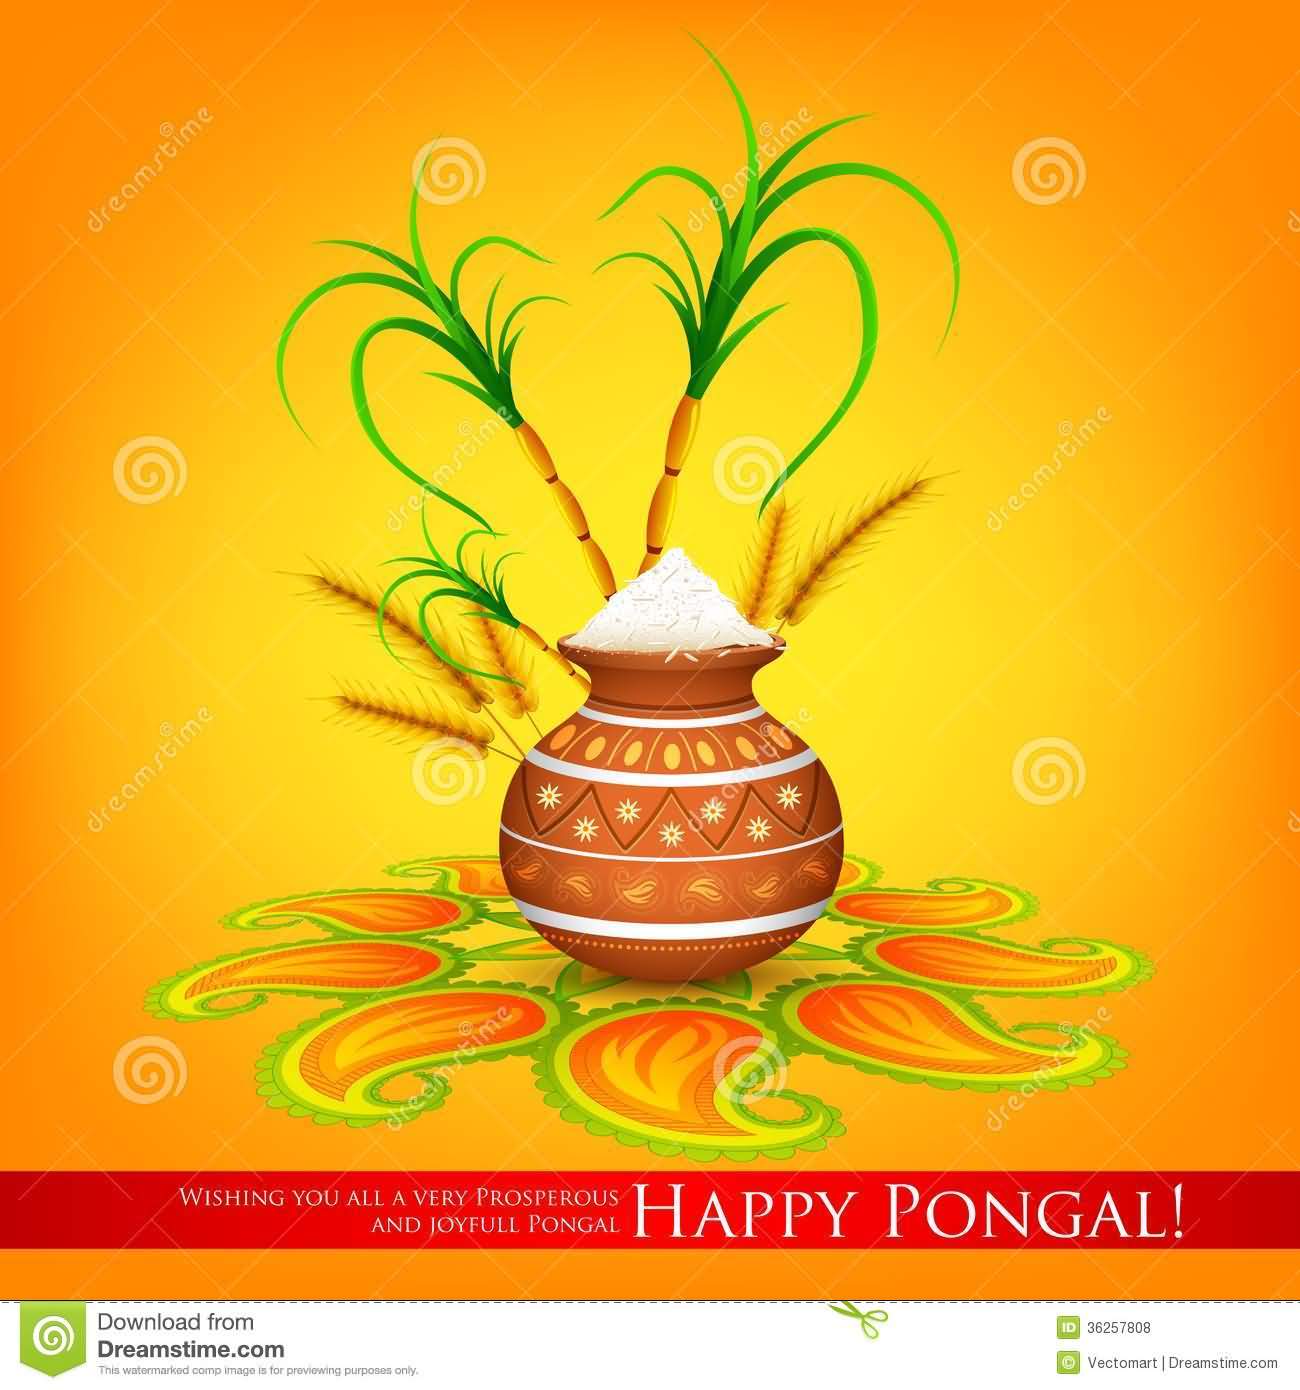 Wishing You All A Very Prosperous And Joyful Pongal Happy Pongal Picture